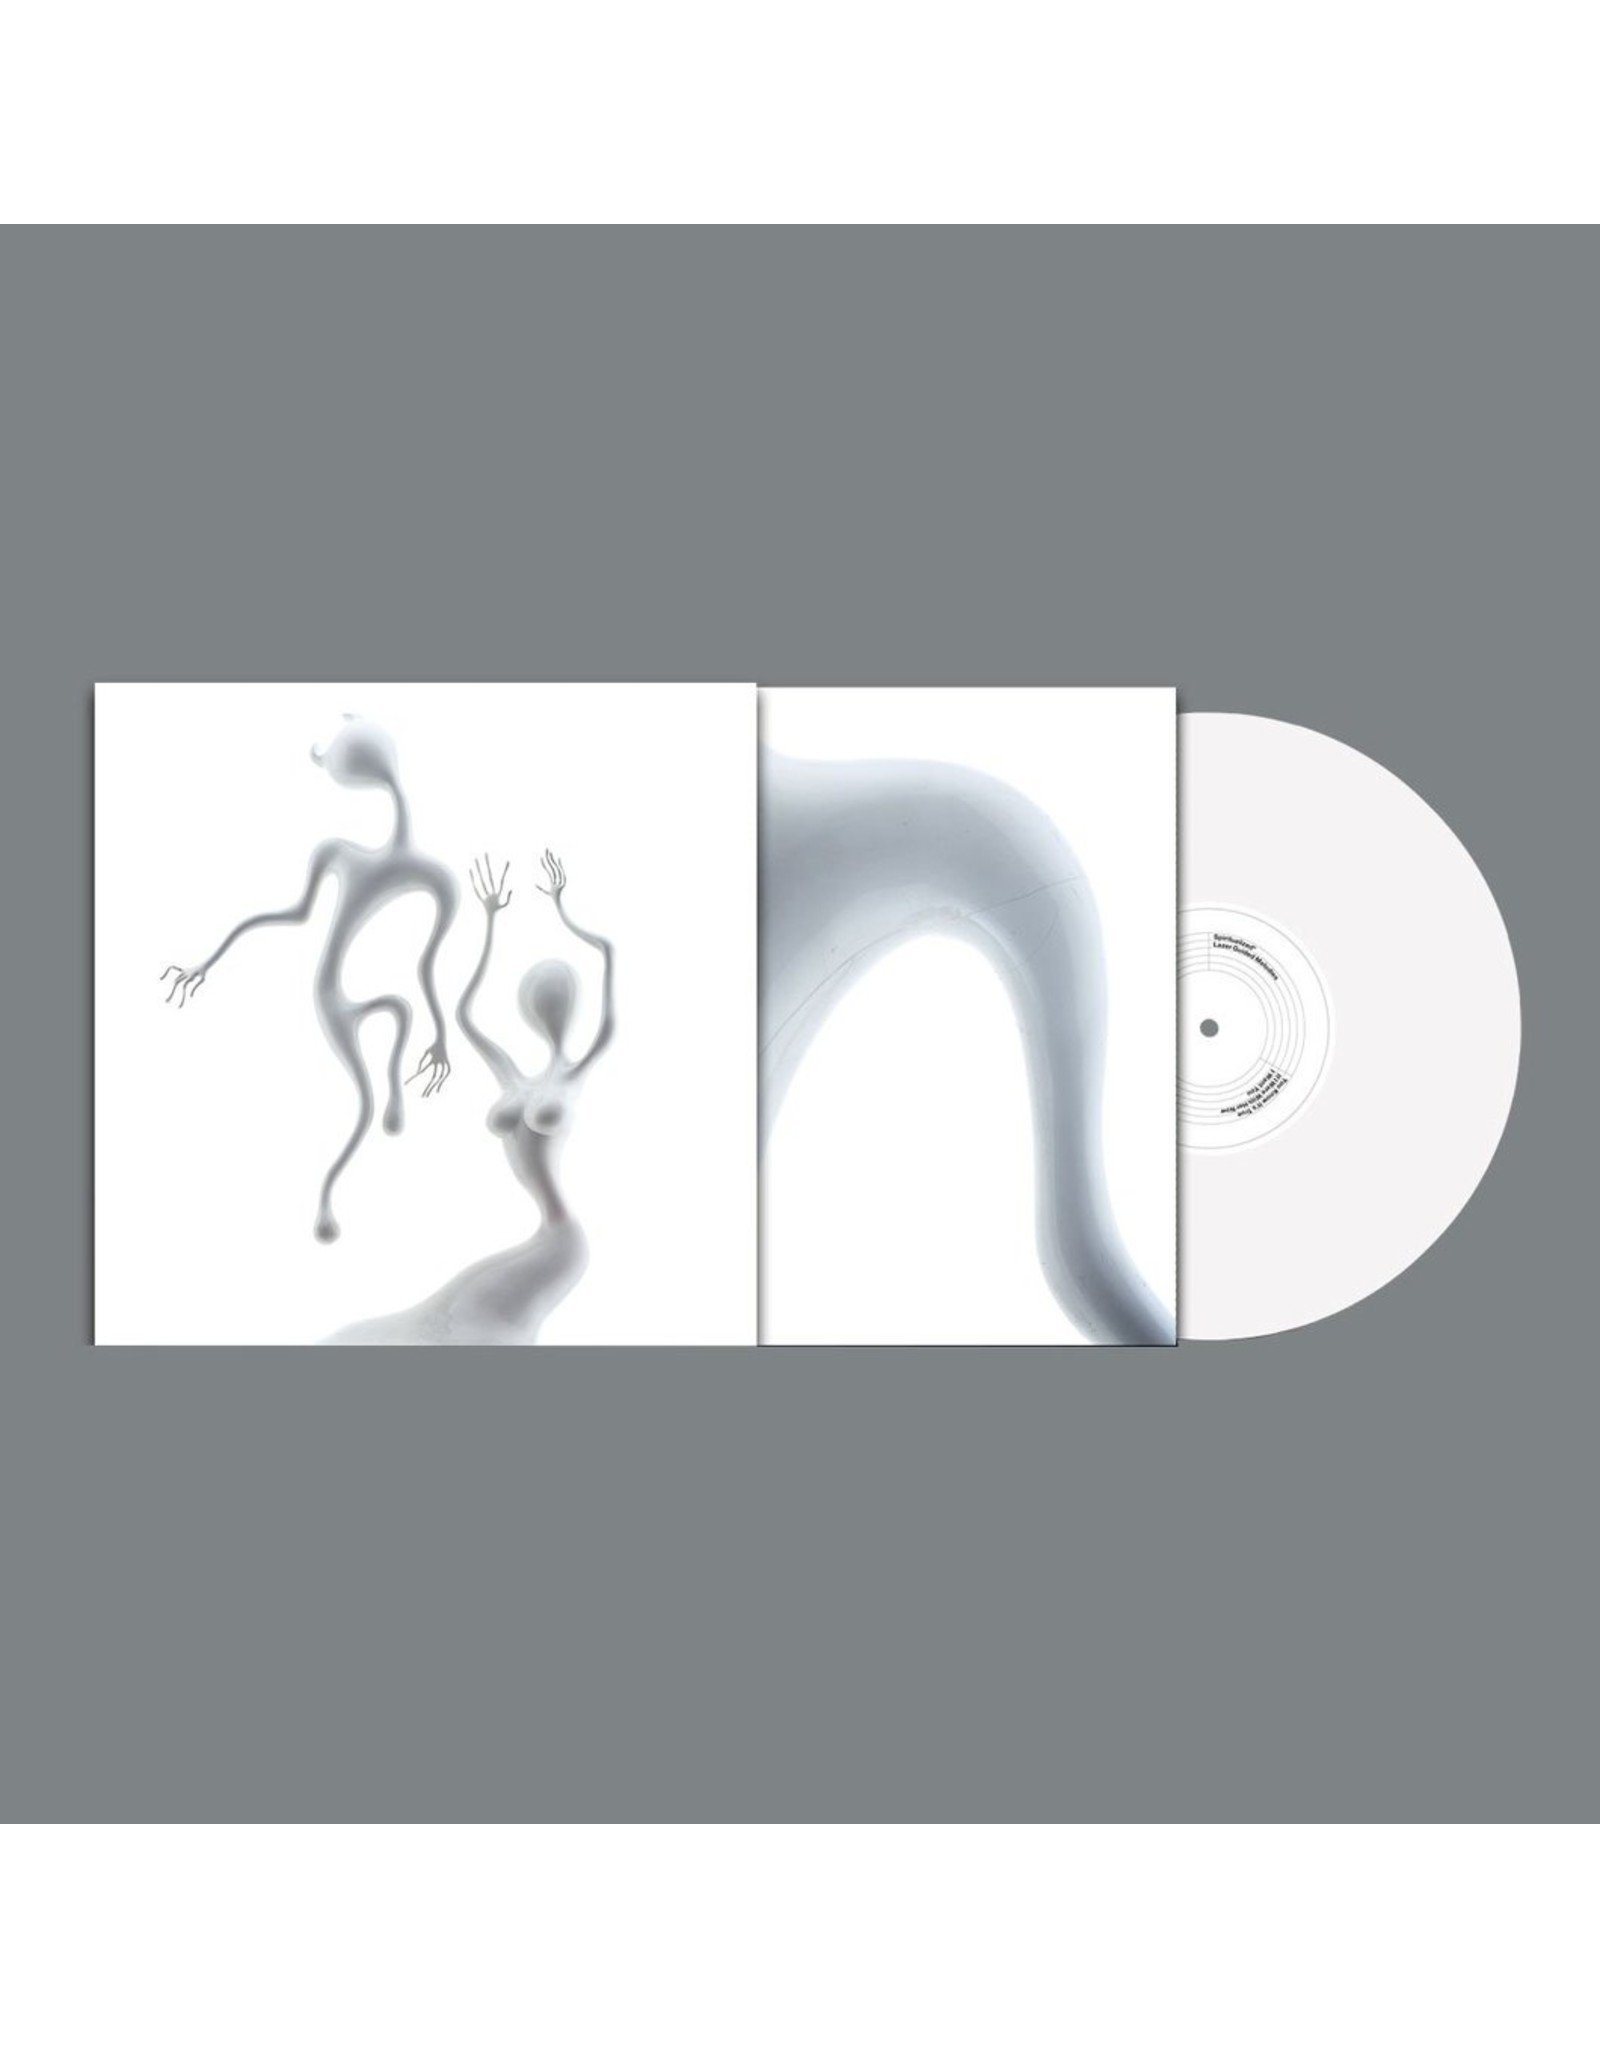 Spiritualized - Lazer Guided Melodies (Exclusive White Vinyl)